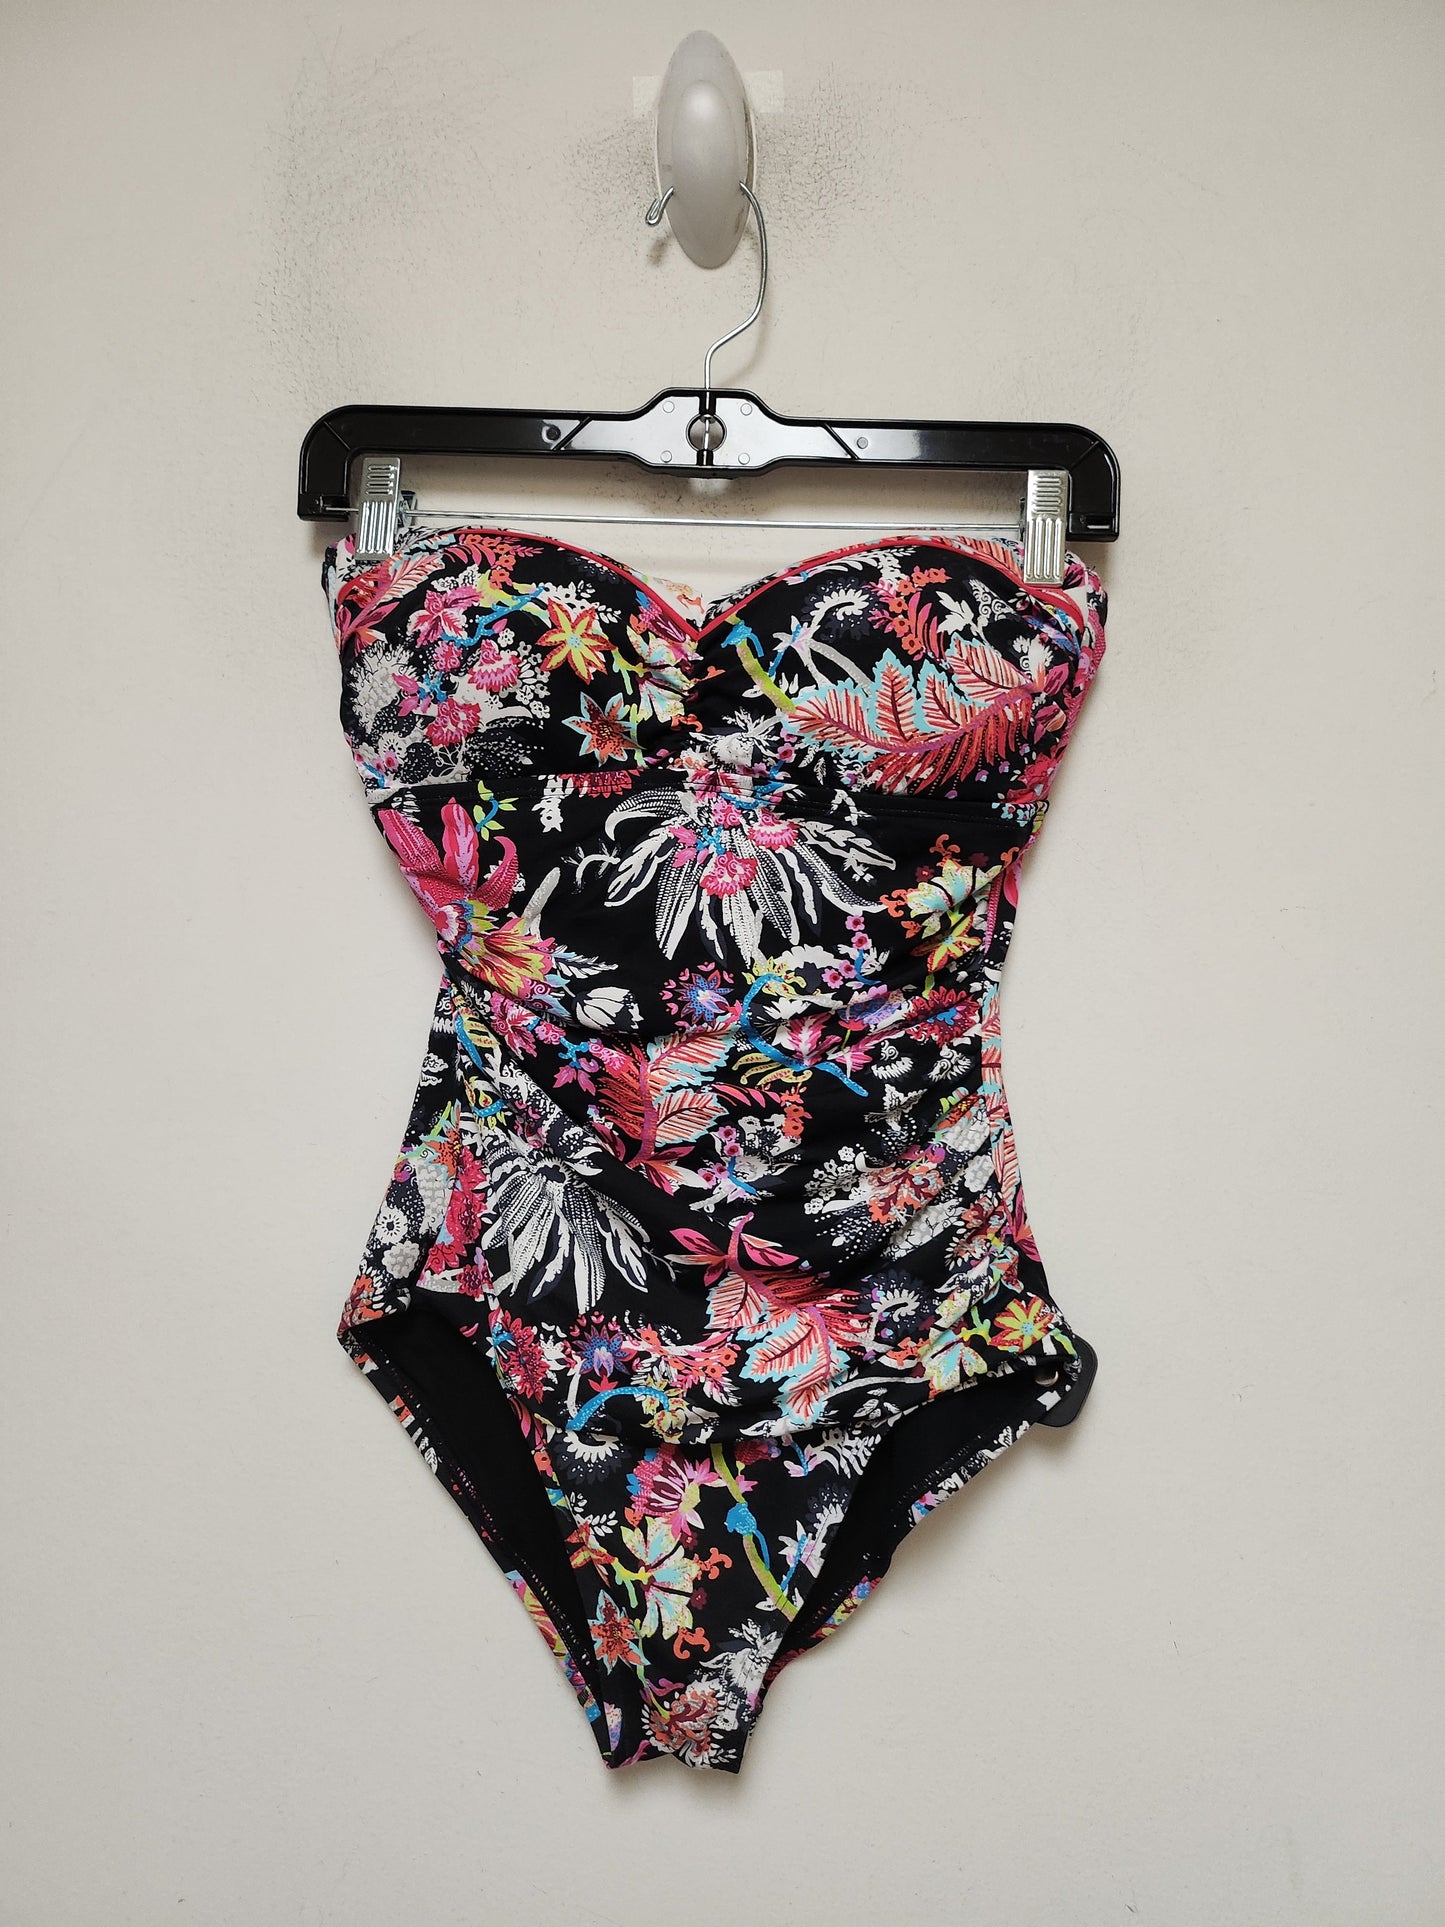 Floral Print Swimsuit Tommy Bahama, Size S